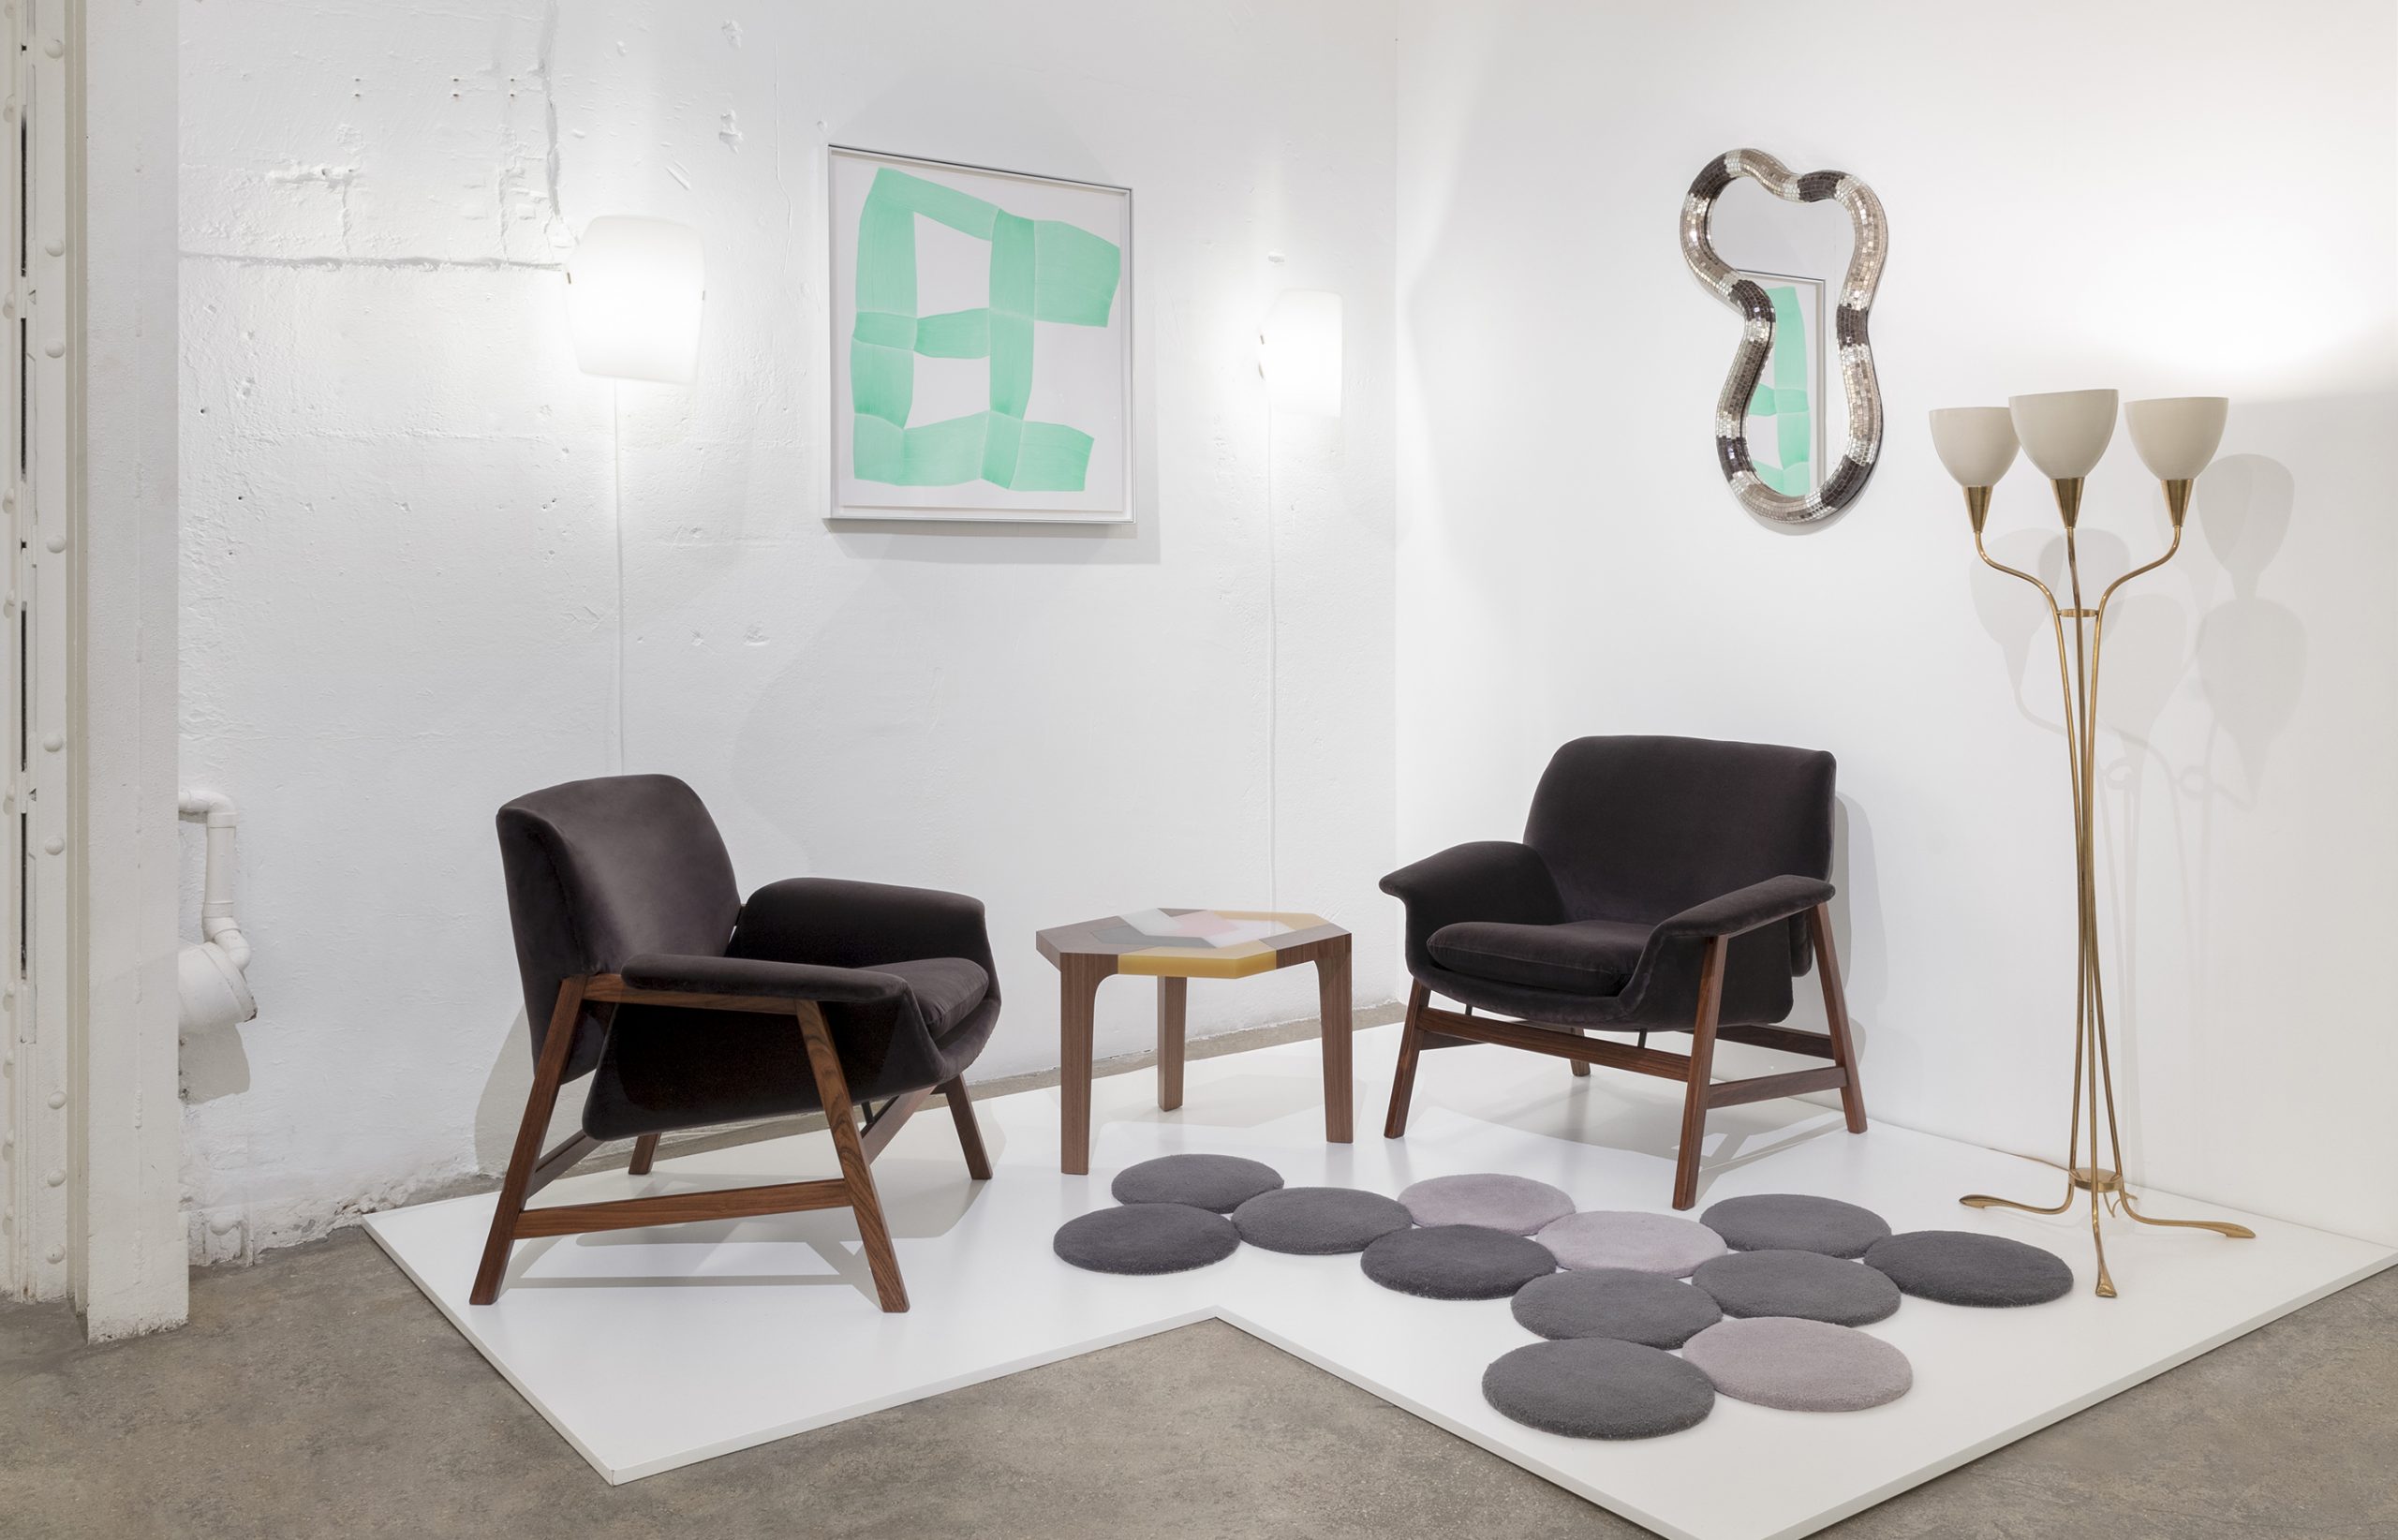 Virgil Abloh showcases new brutalist furniture collection at Galerie Kreo -  The Spaces